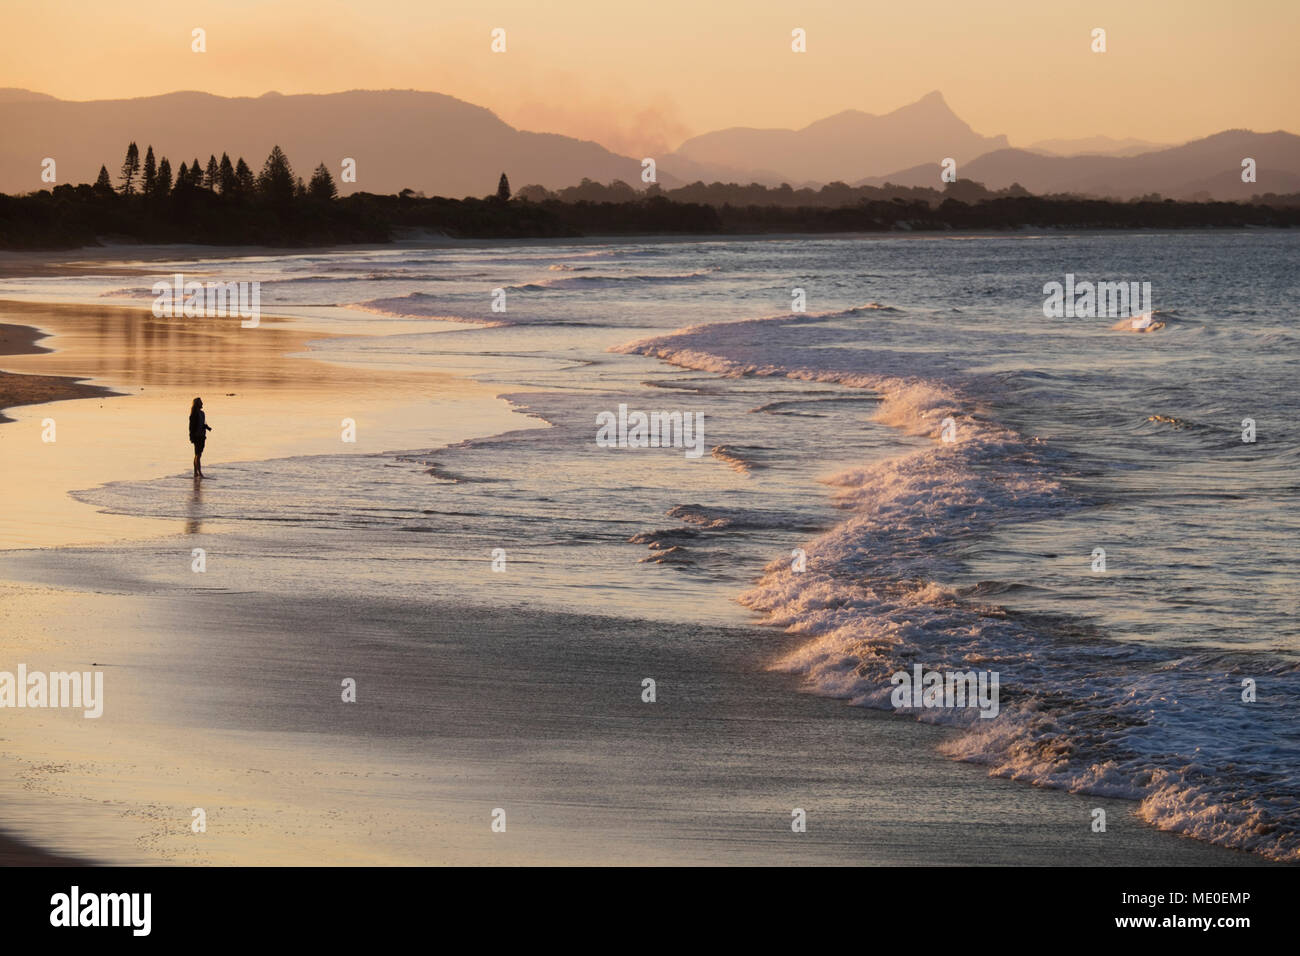 Silhouette of person on beach watching the waves hitting the shore at Byron Bay in New south Wales, Australia Stock Photo